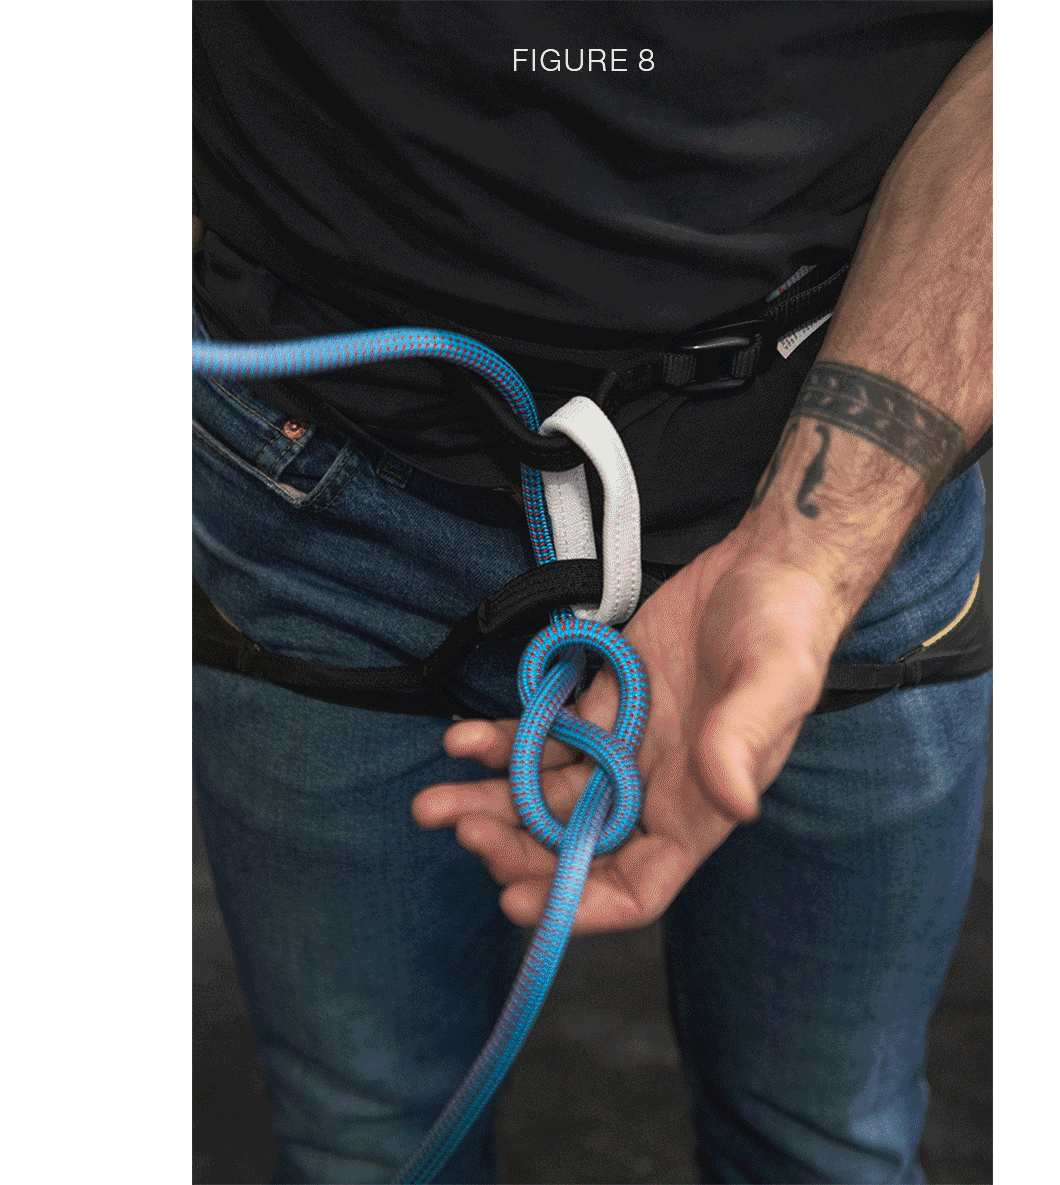 A climber ties in with a figure 8 knot.